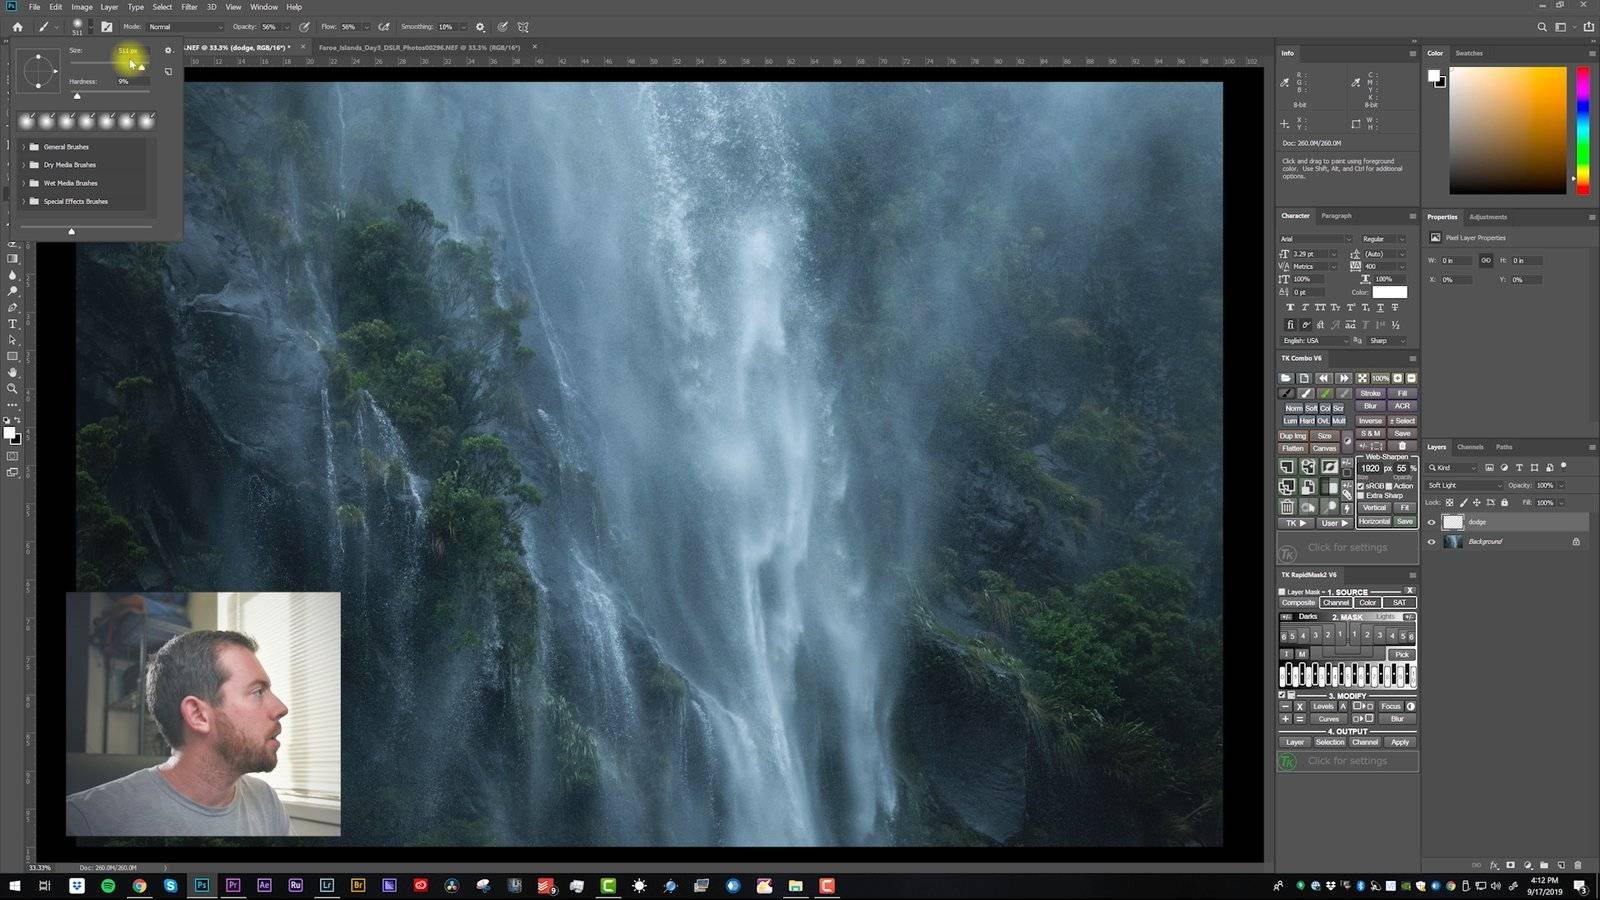 Dodge and Burn Photoshop Tutorial for Landscape Photography